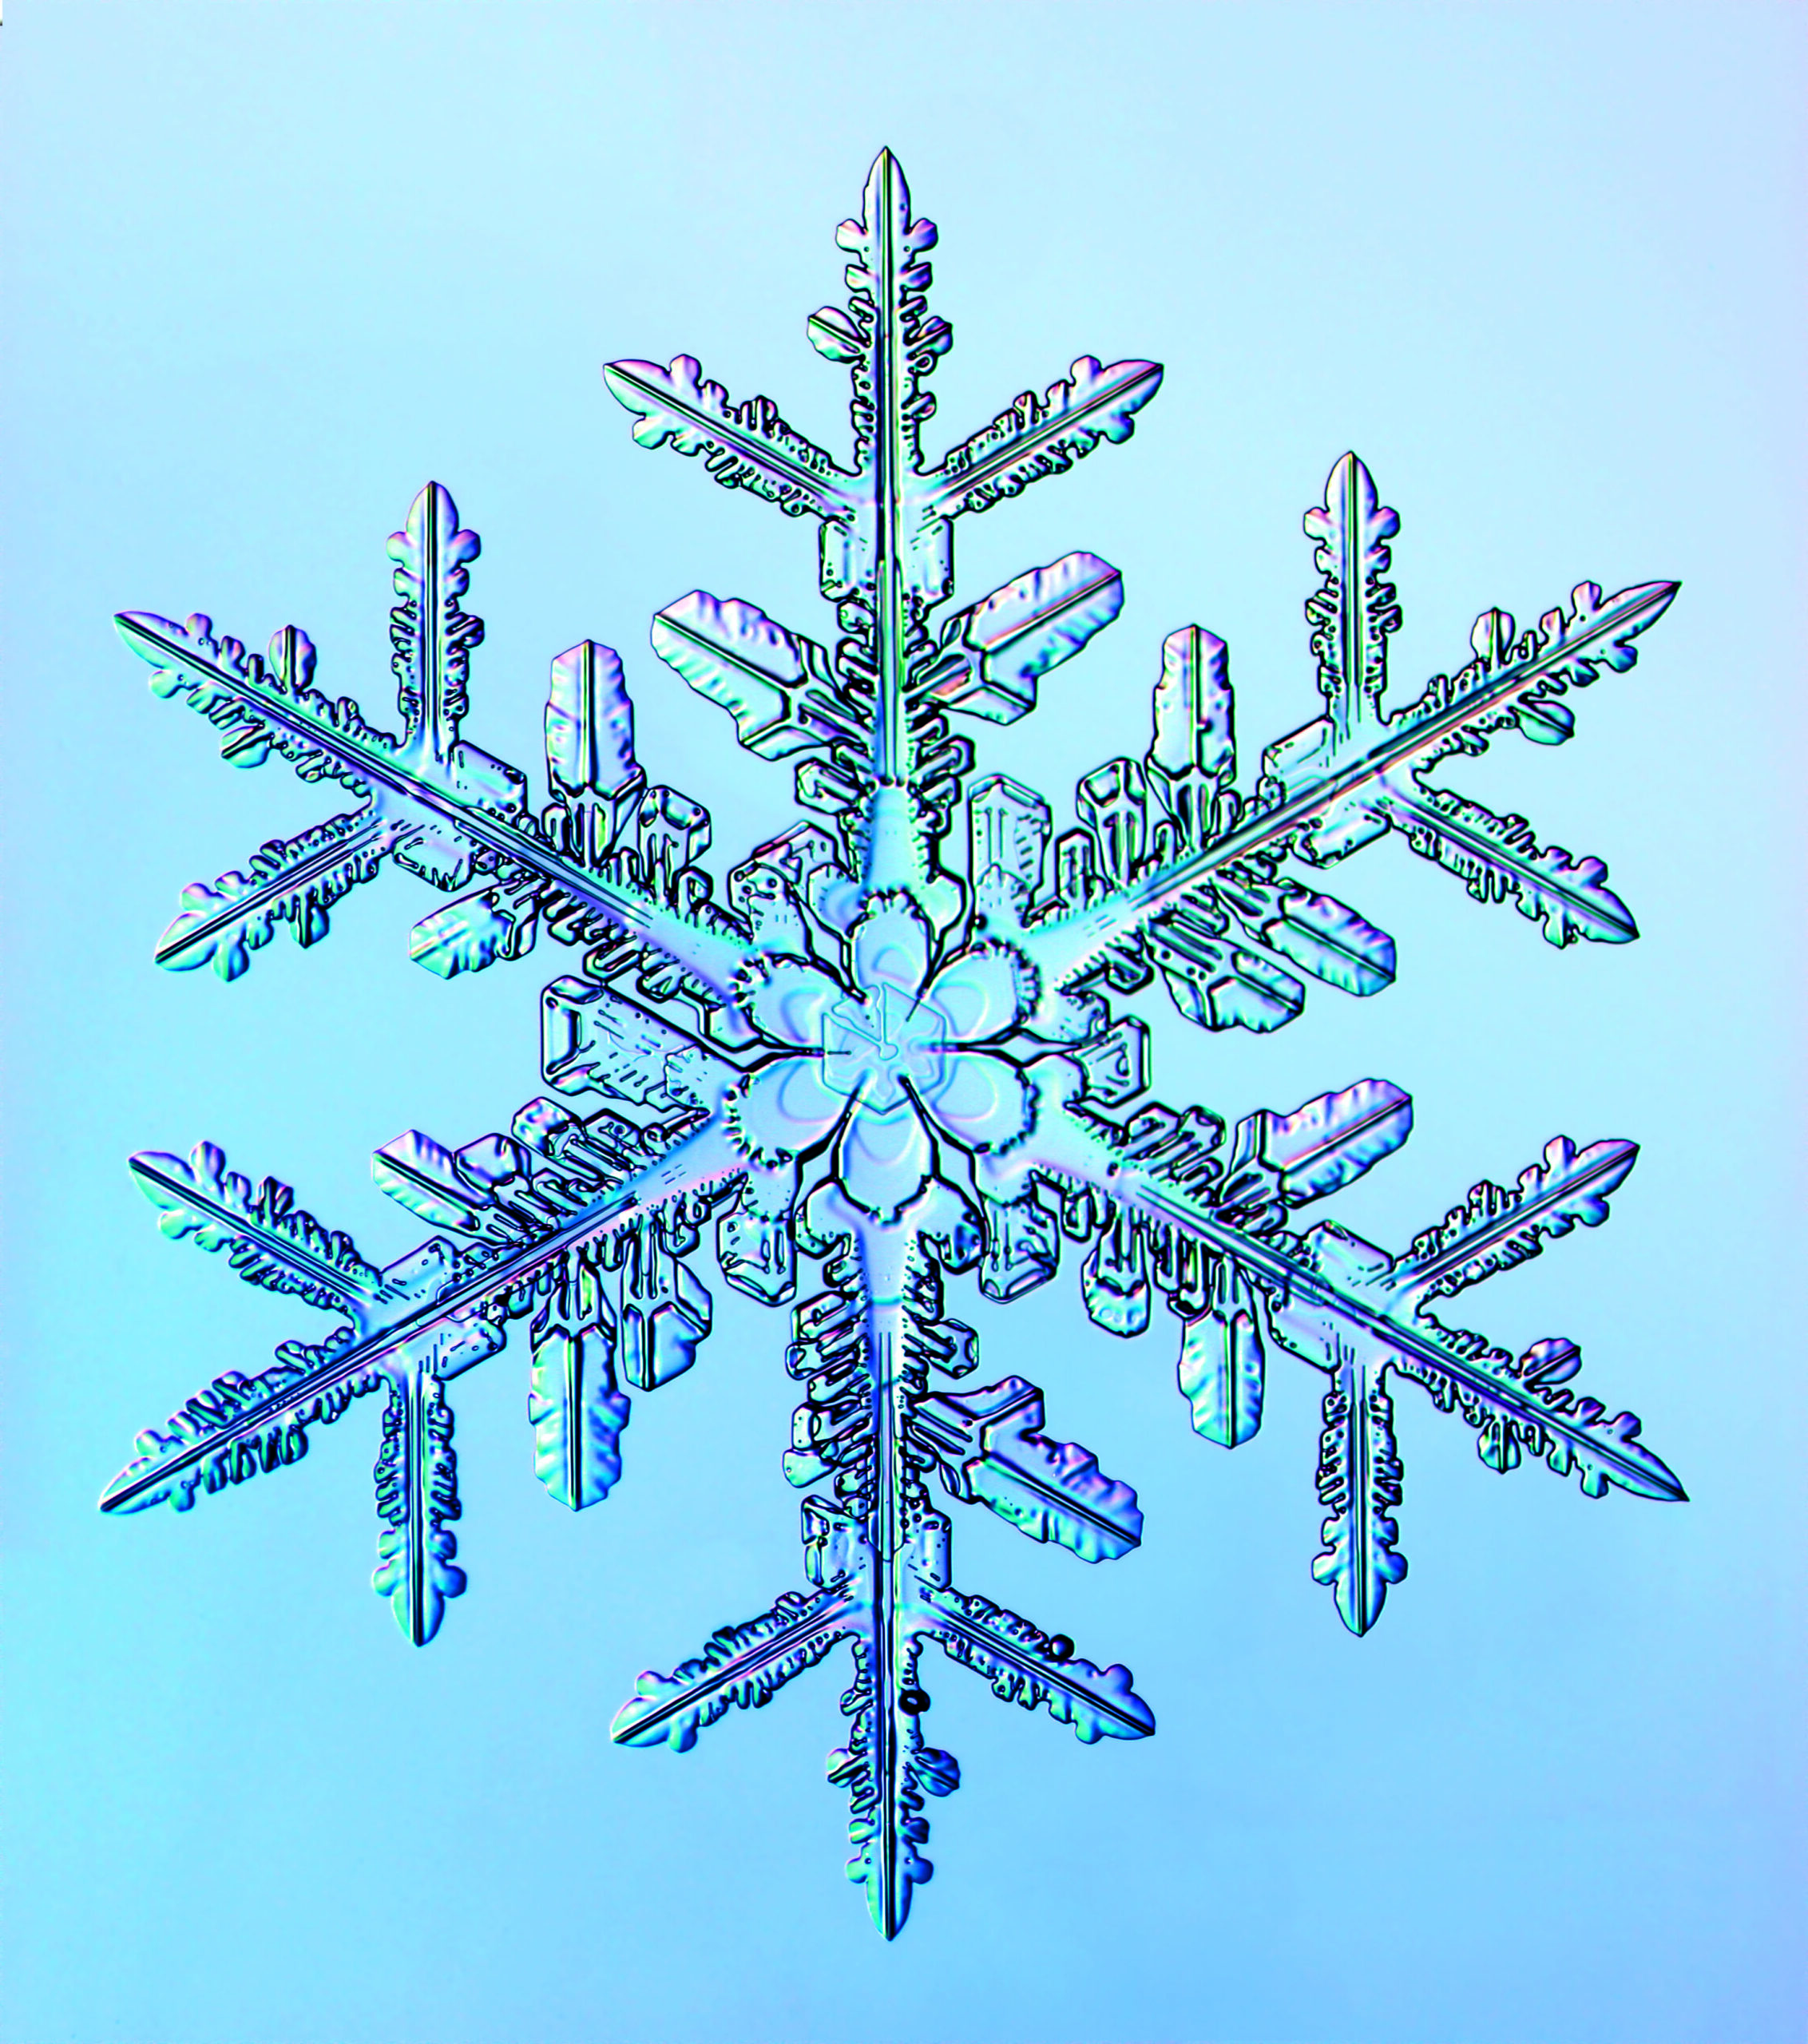 Why Scientists Find Snowflakes Cool